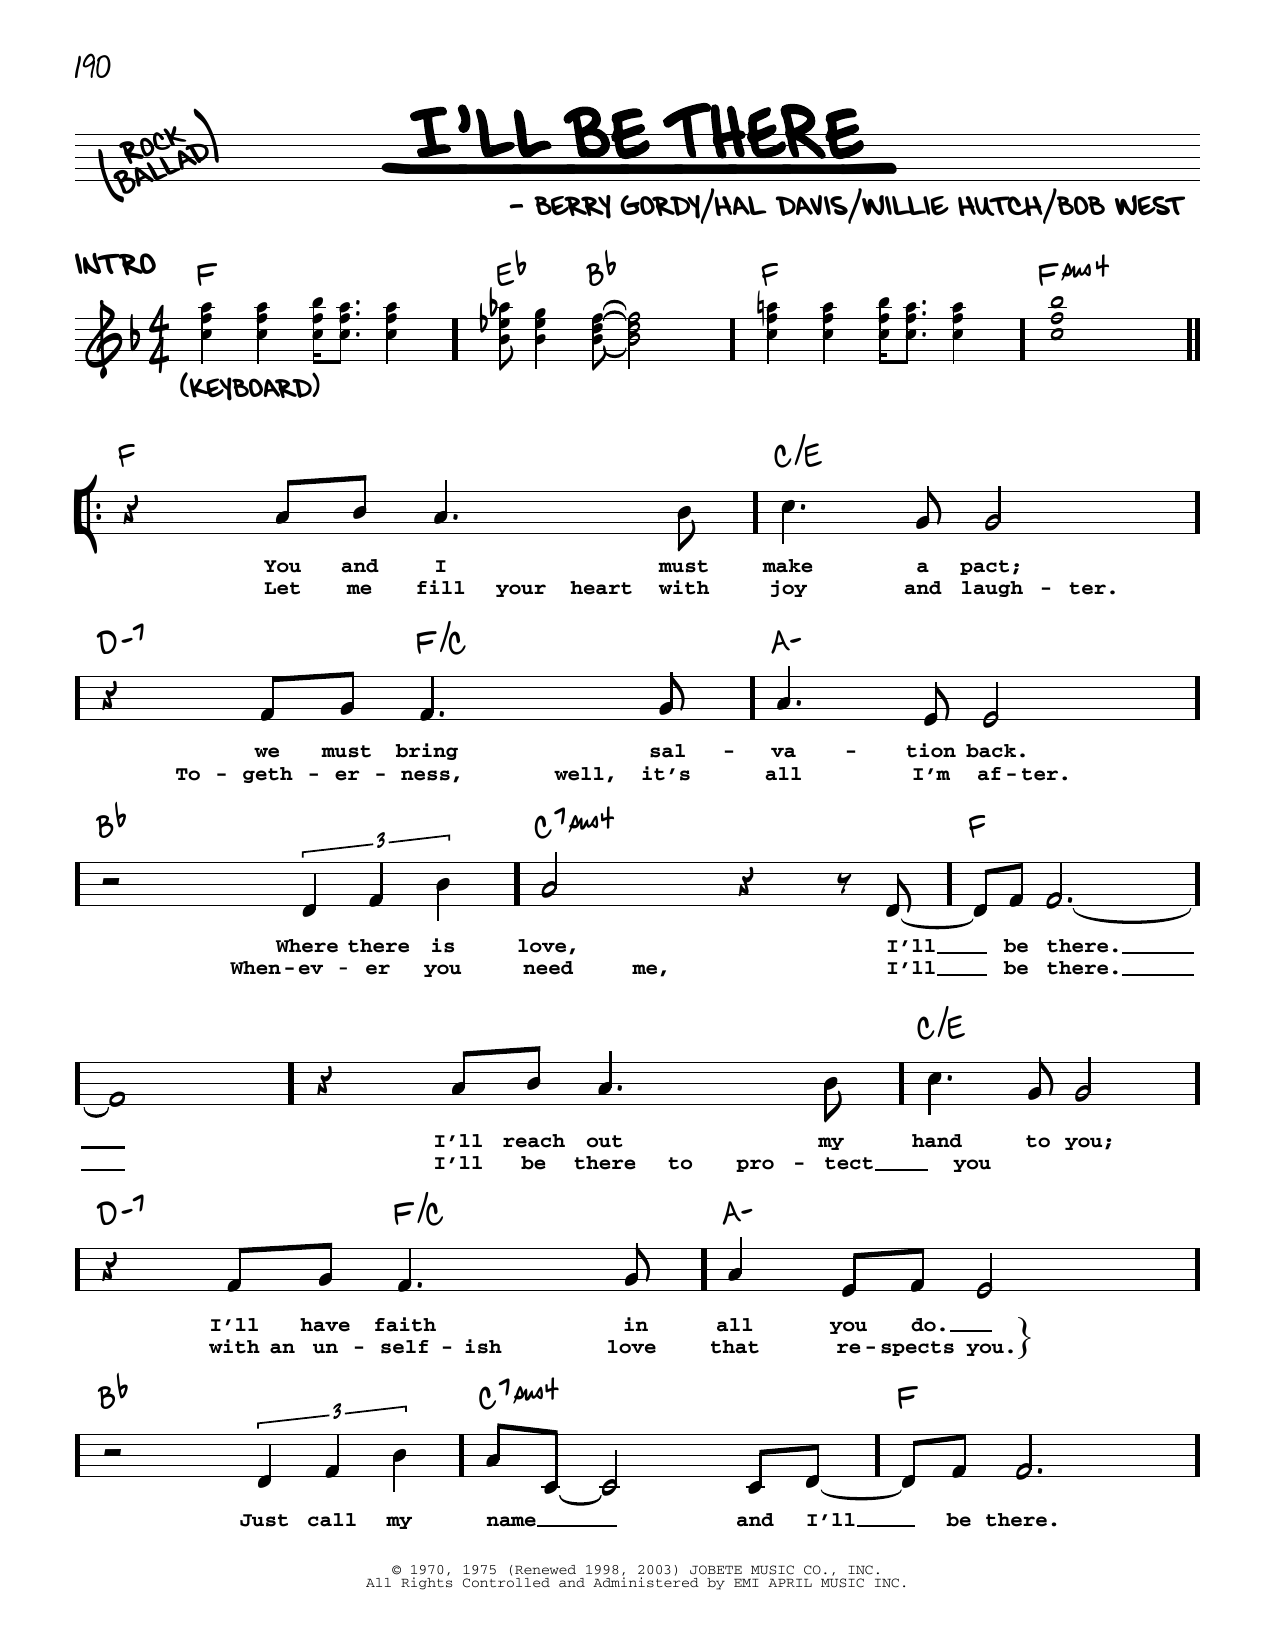 Download The Jackson 5 I'll Be There Sheet Music